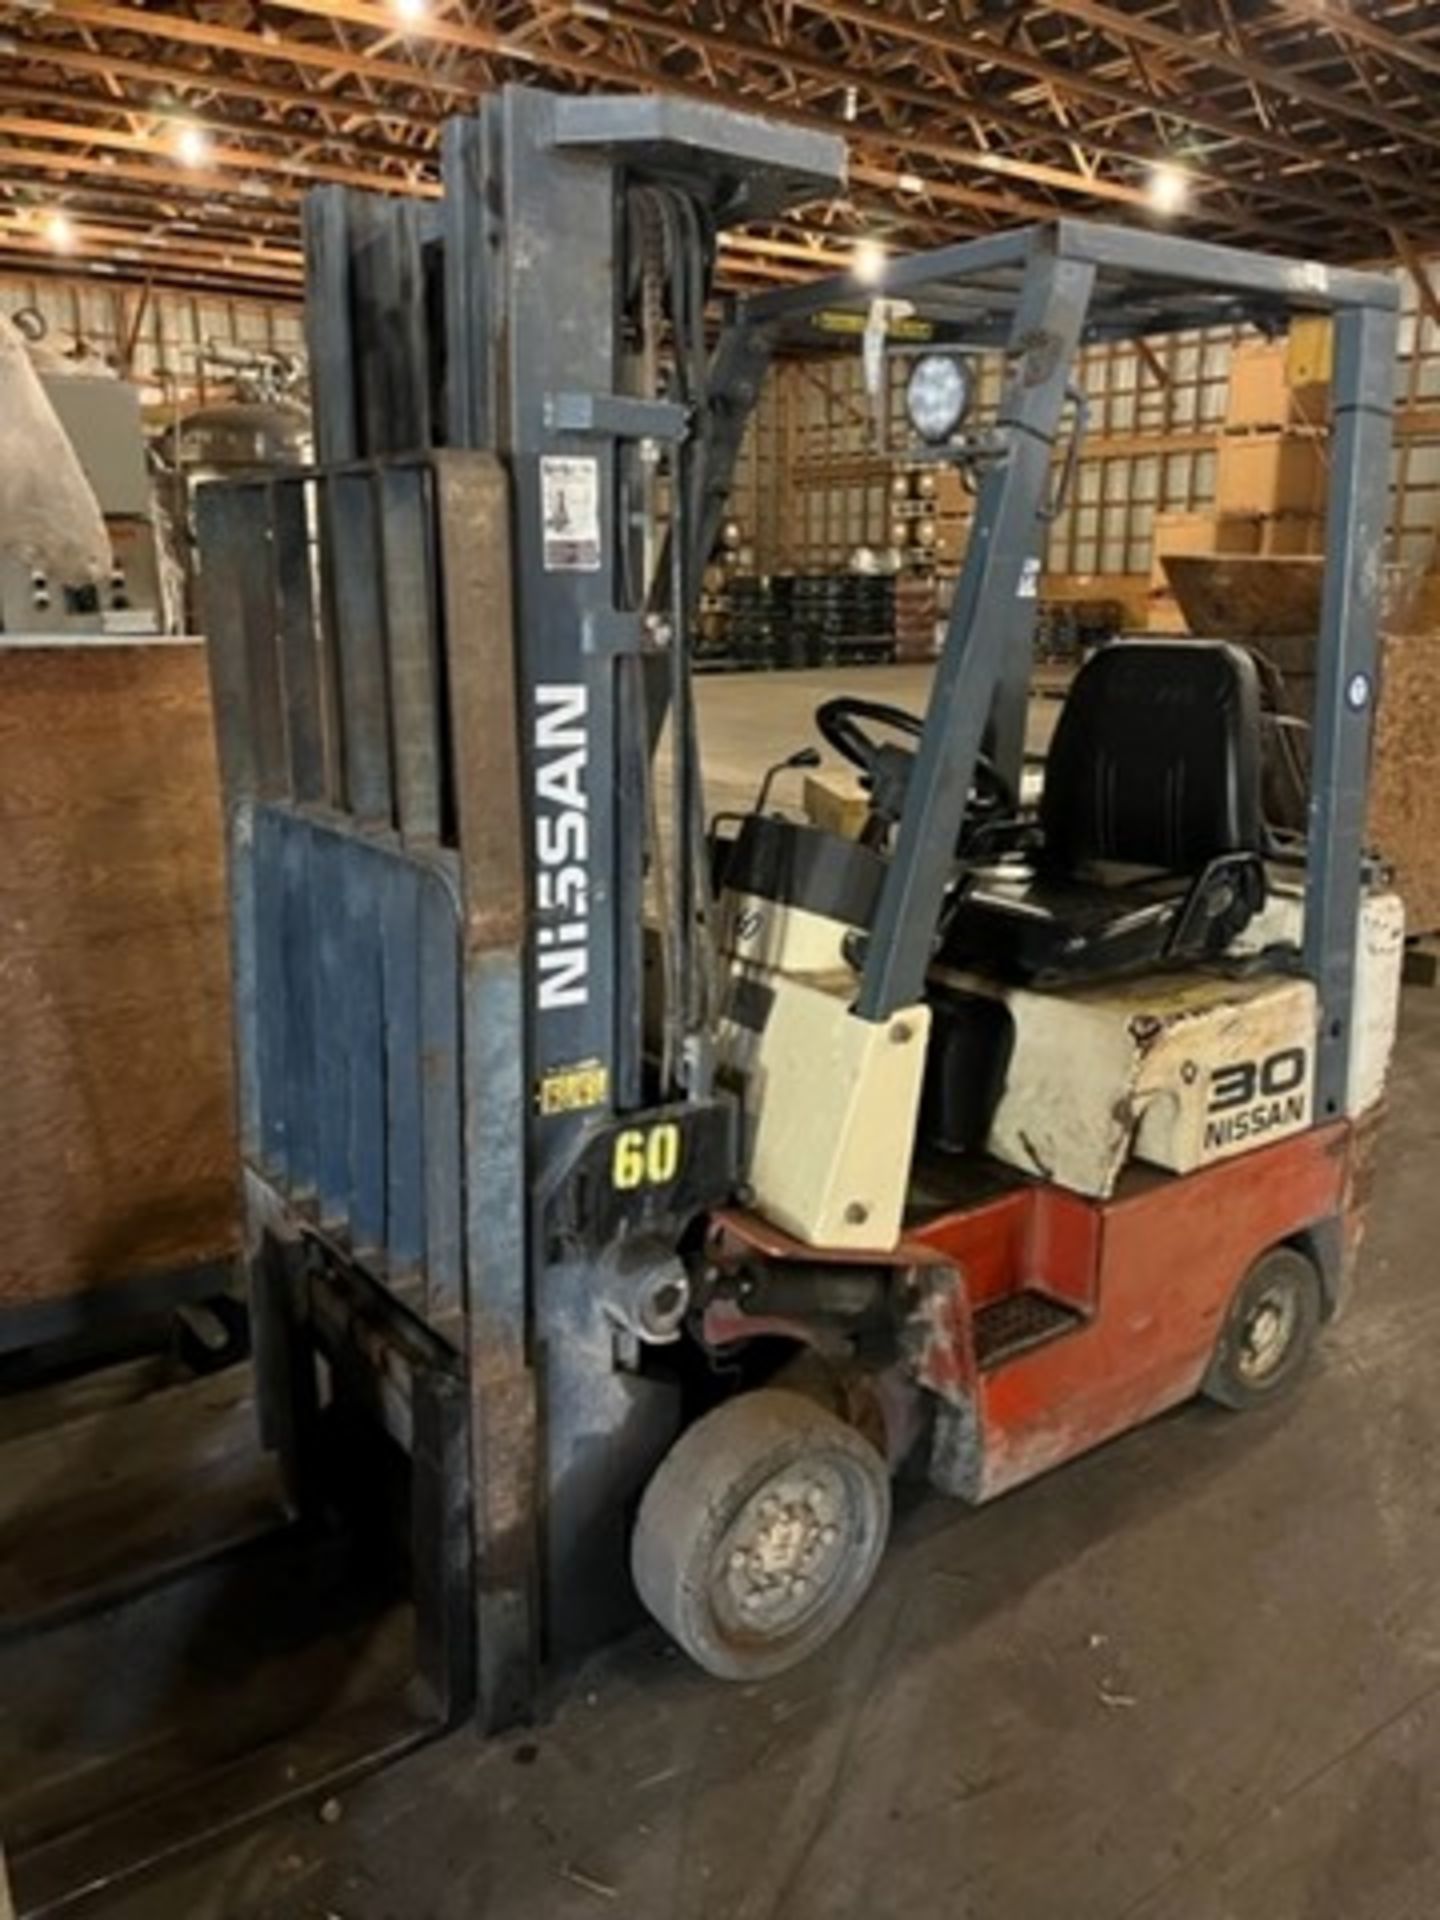 Consignment Item - located in Breese IL: Nissan 30 forklift #60 - Image 2 of 2